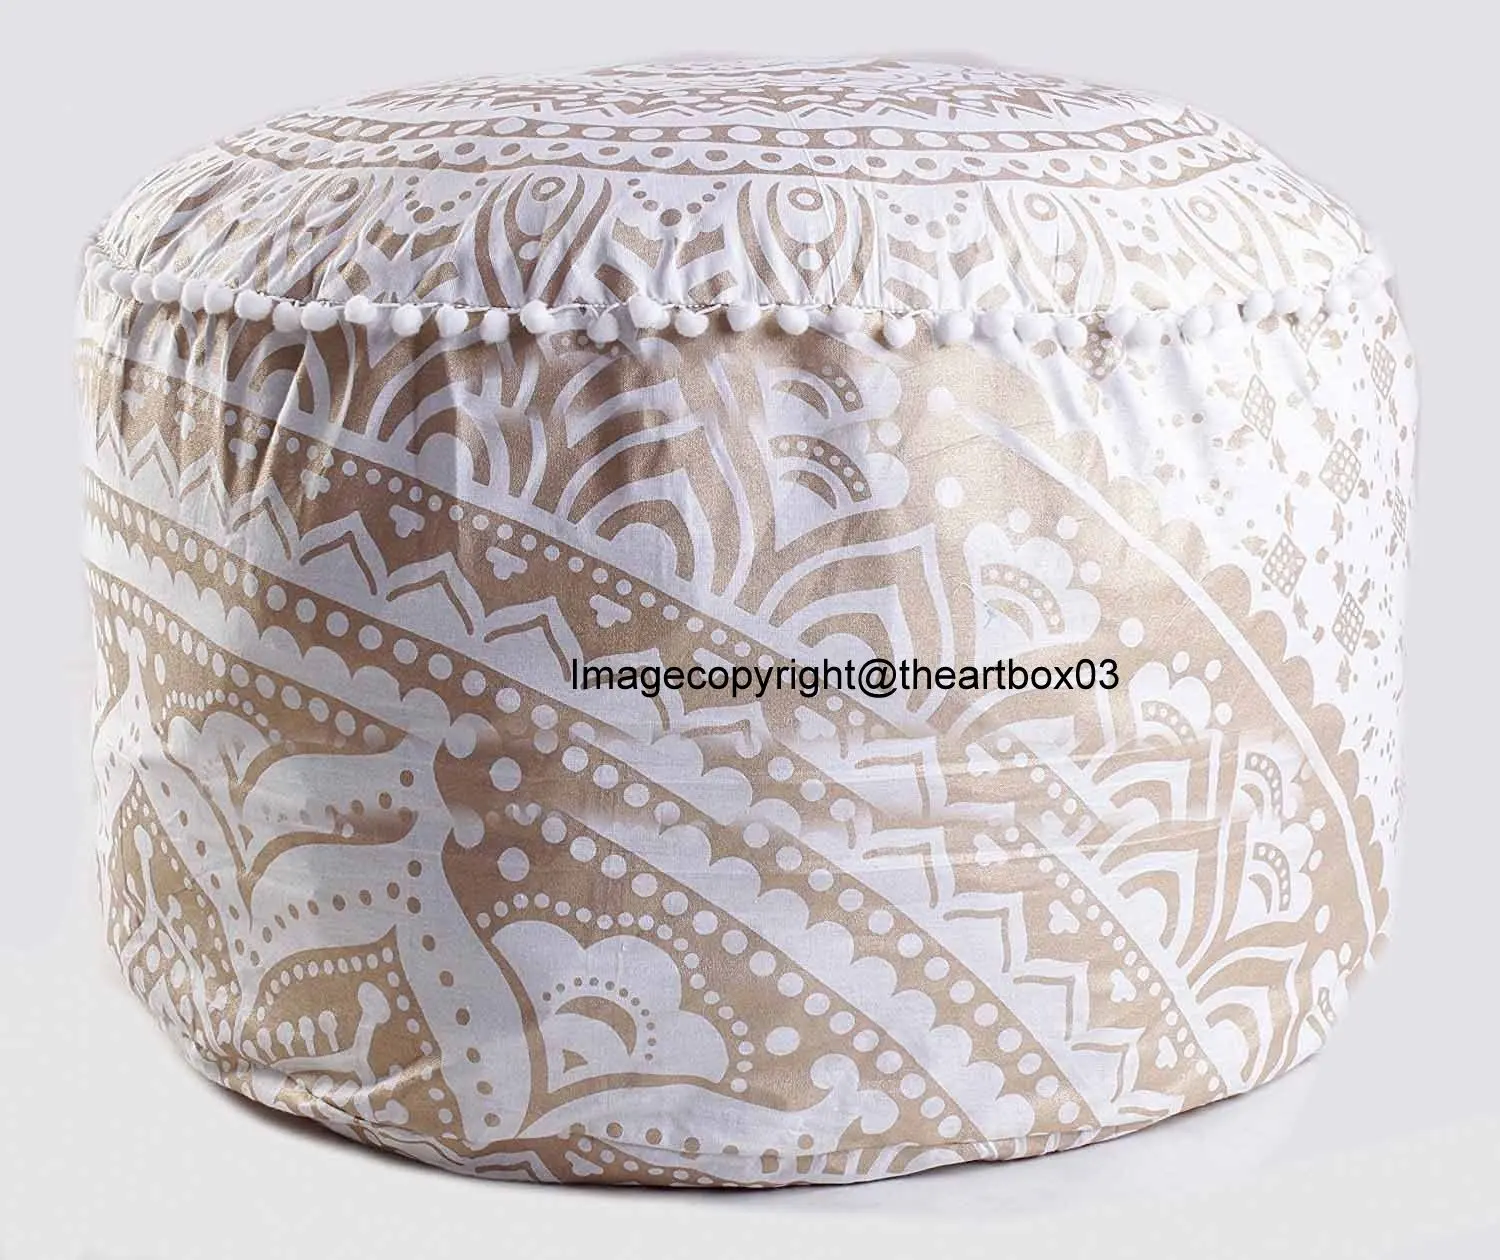 Indian Round Ottoman Mandala Pattern Gold Ombre Footstool Pouffe Home Decor Furniture Living Seating Puff Cushion Pillow Cover